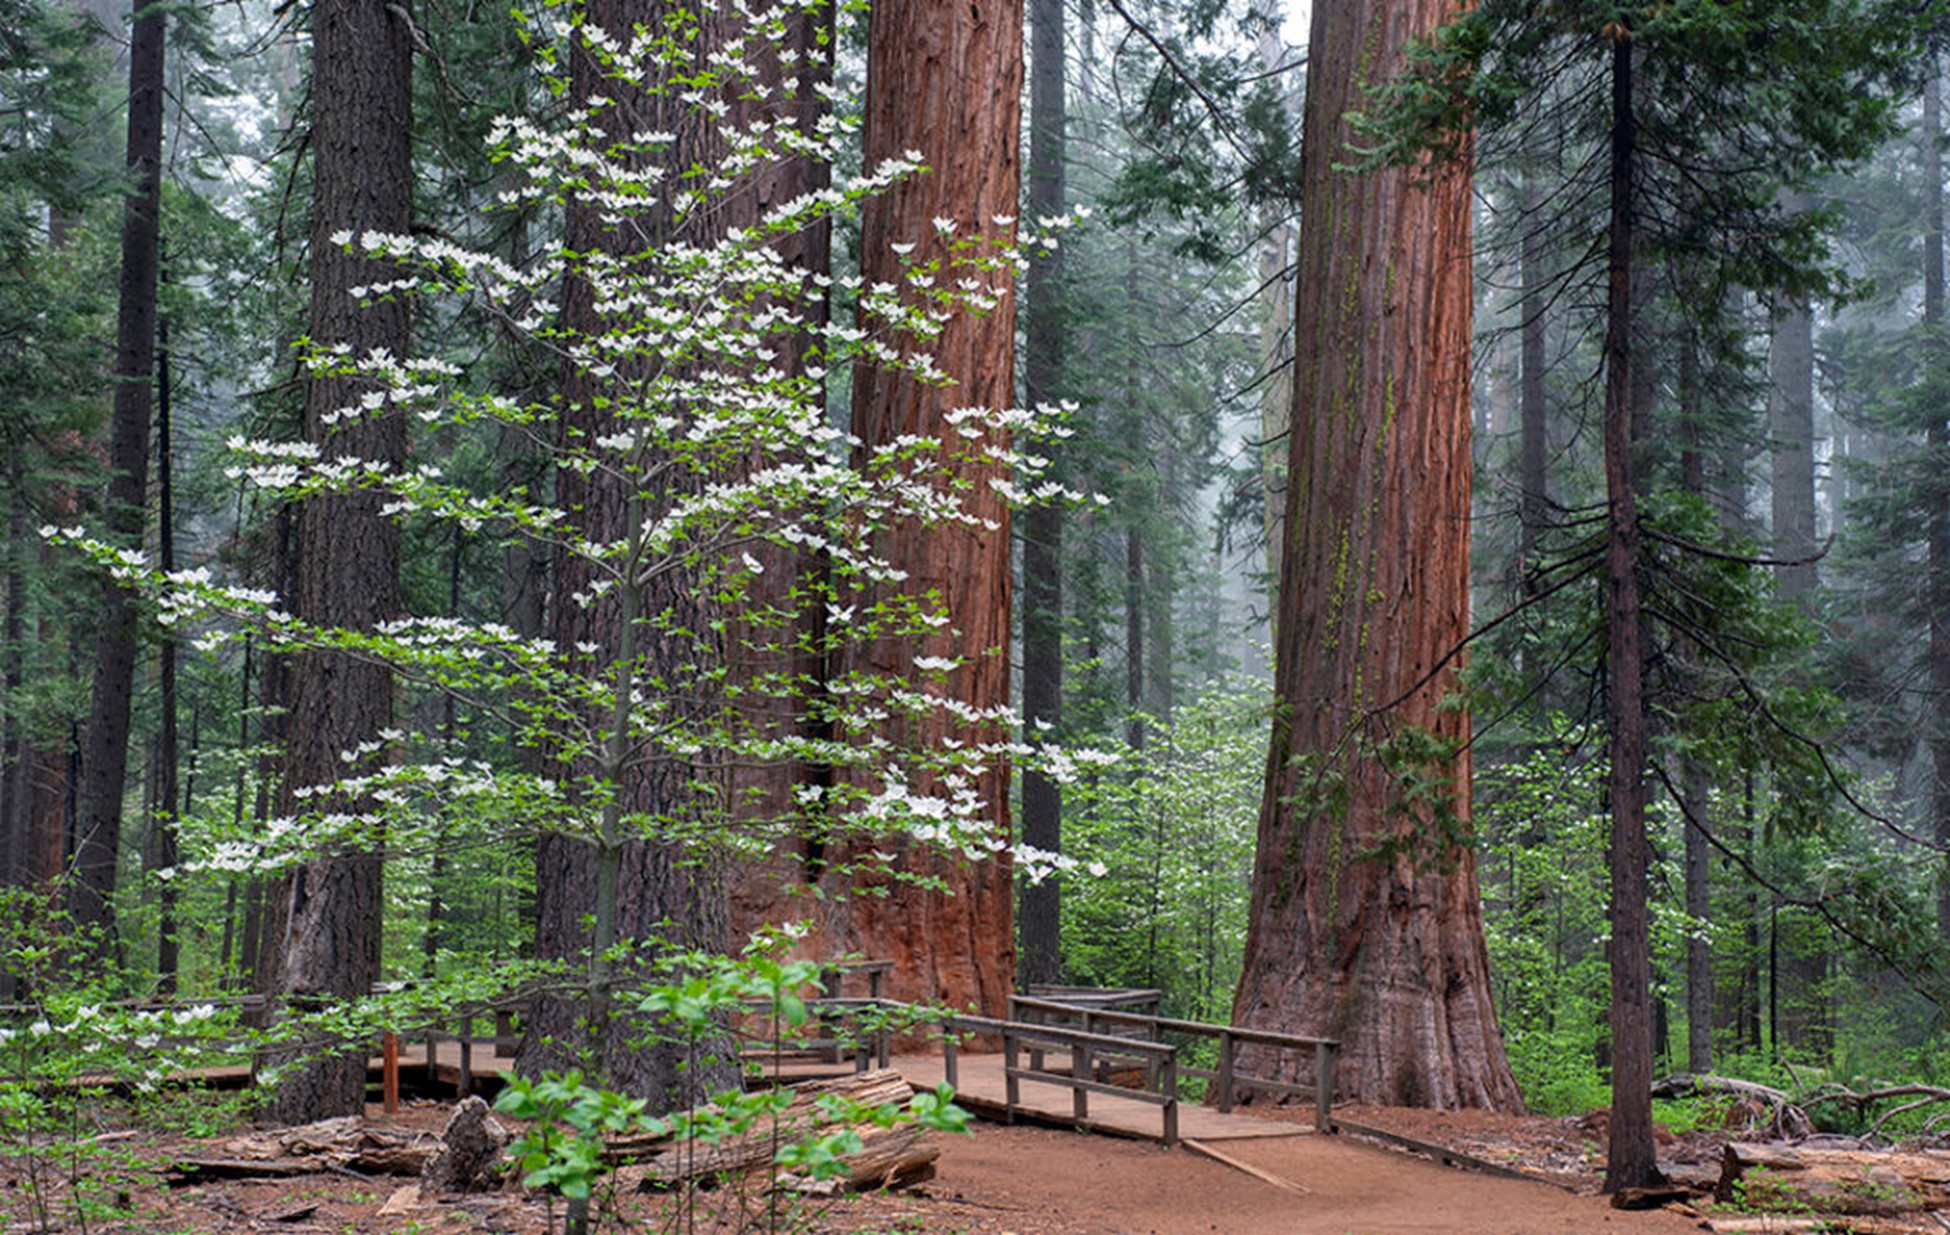 Photograph of a forest showing the trunks of big redwood trees.